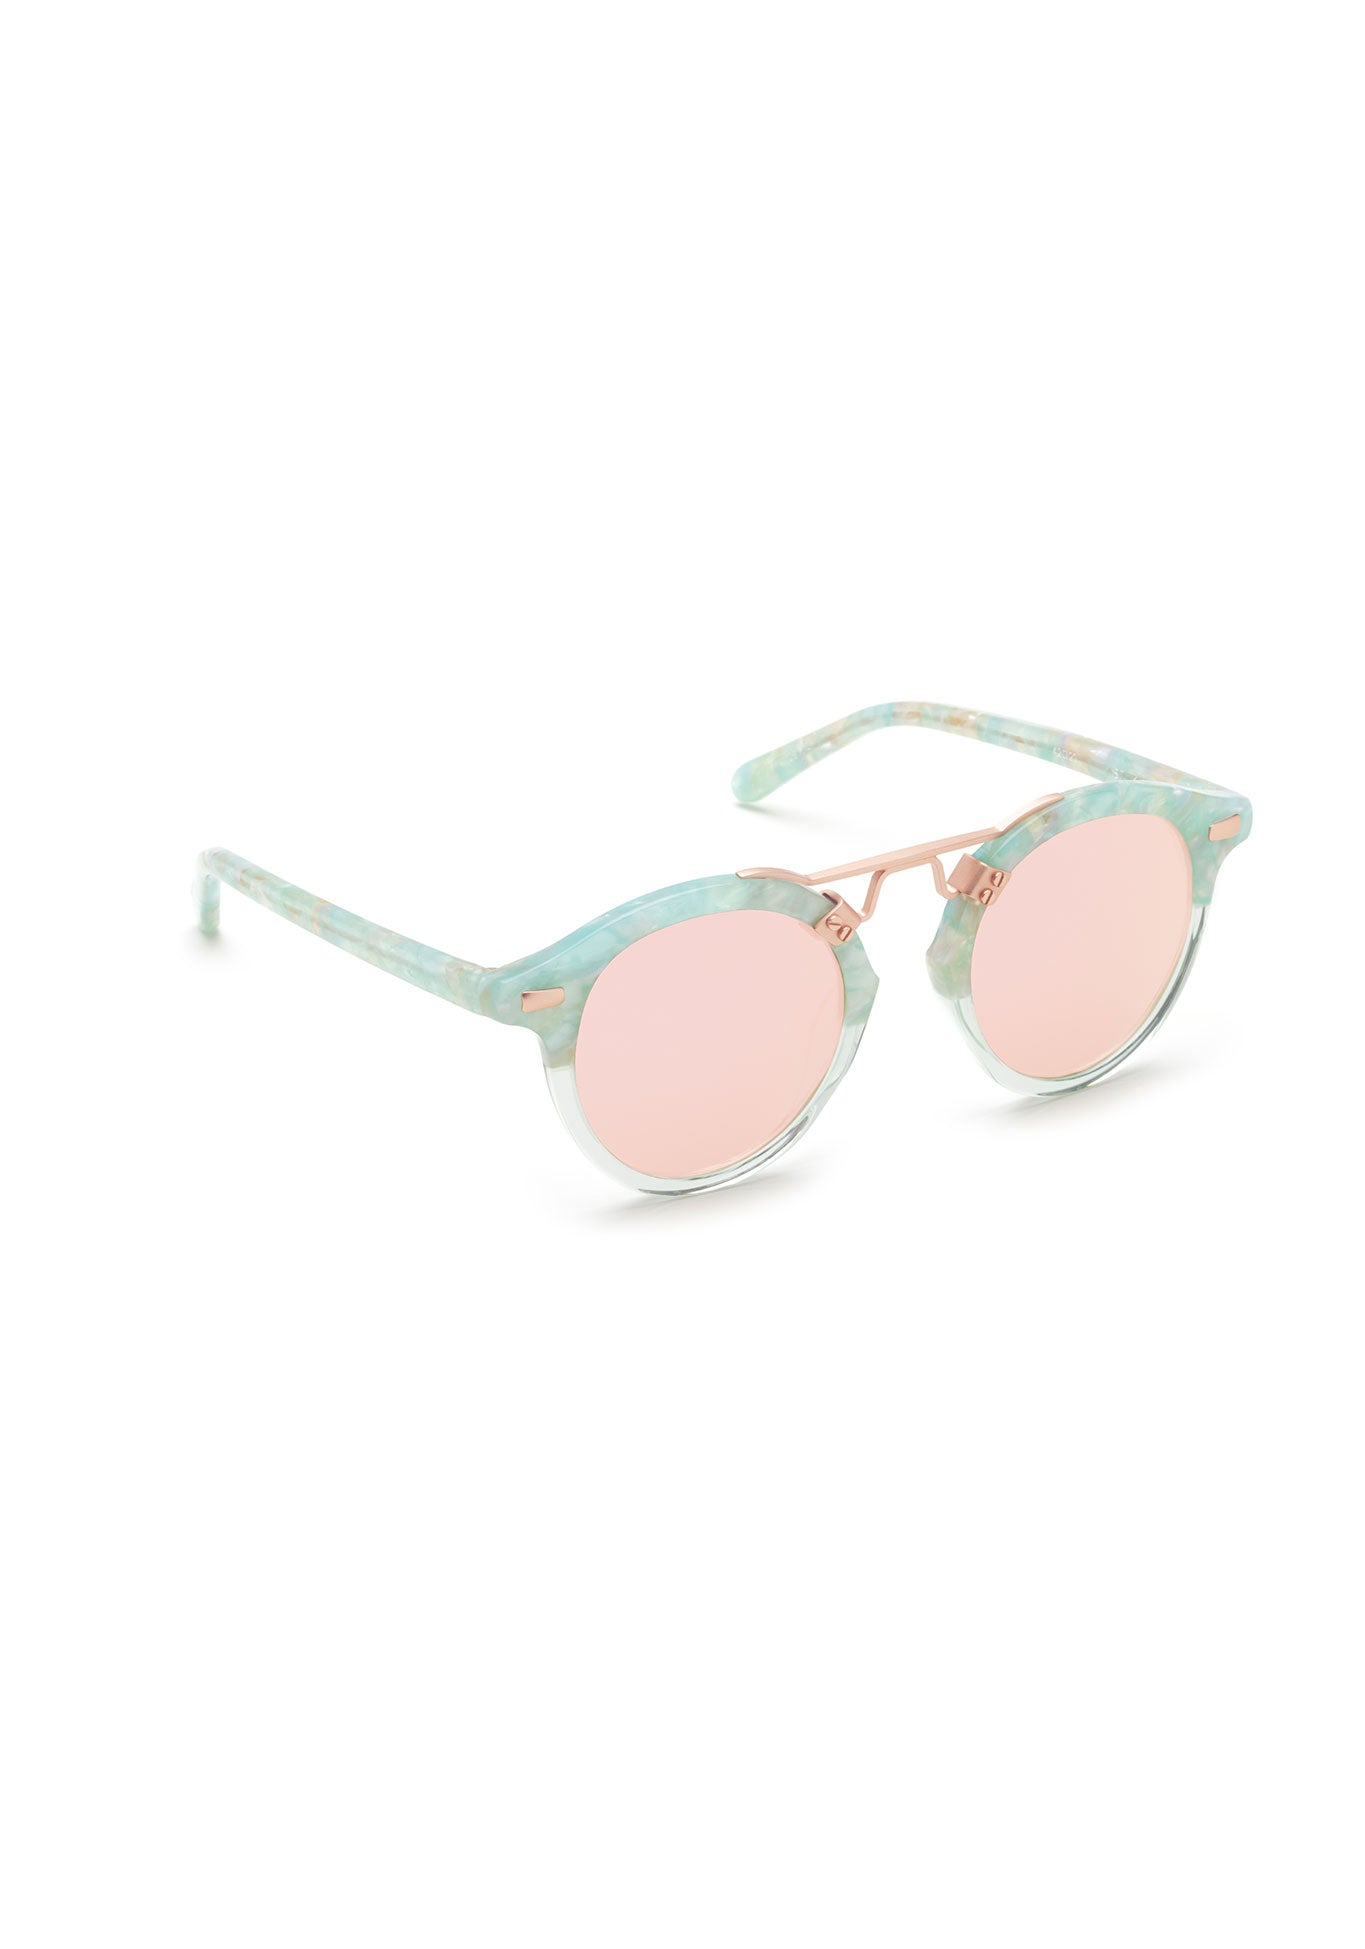 KREWE - ST. LOUIS KIDS | Seaglass to Marine Rose Gold Mirrored handcrafted, luxury blue and pink sunglasses made for children. Featuring krewe's iconic double metal bridge